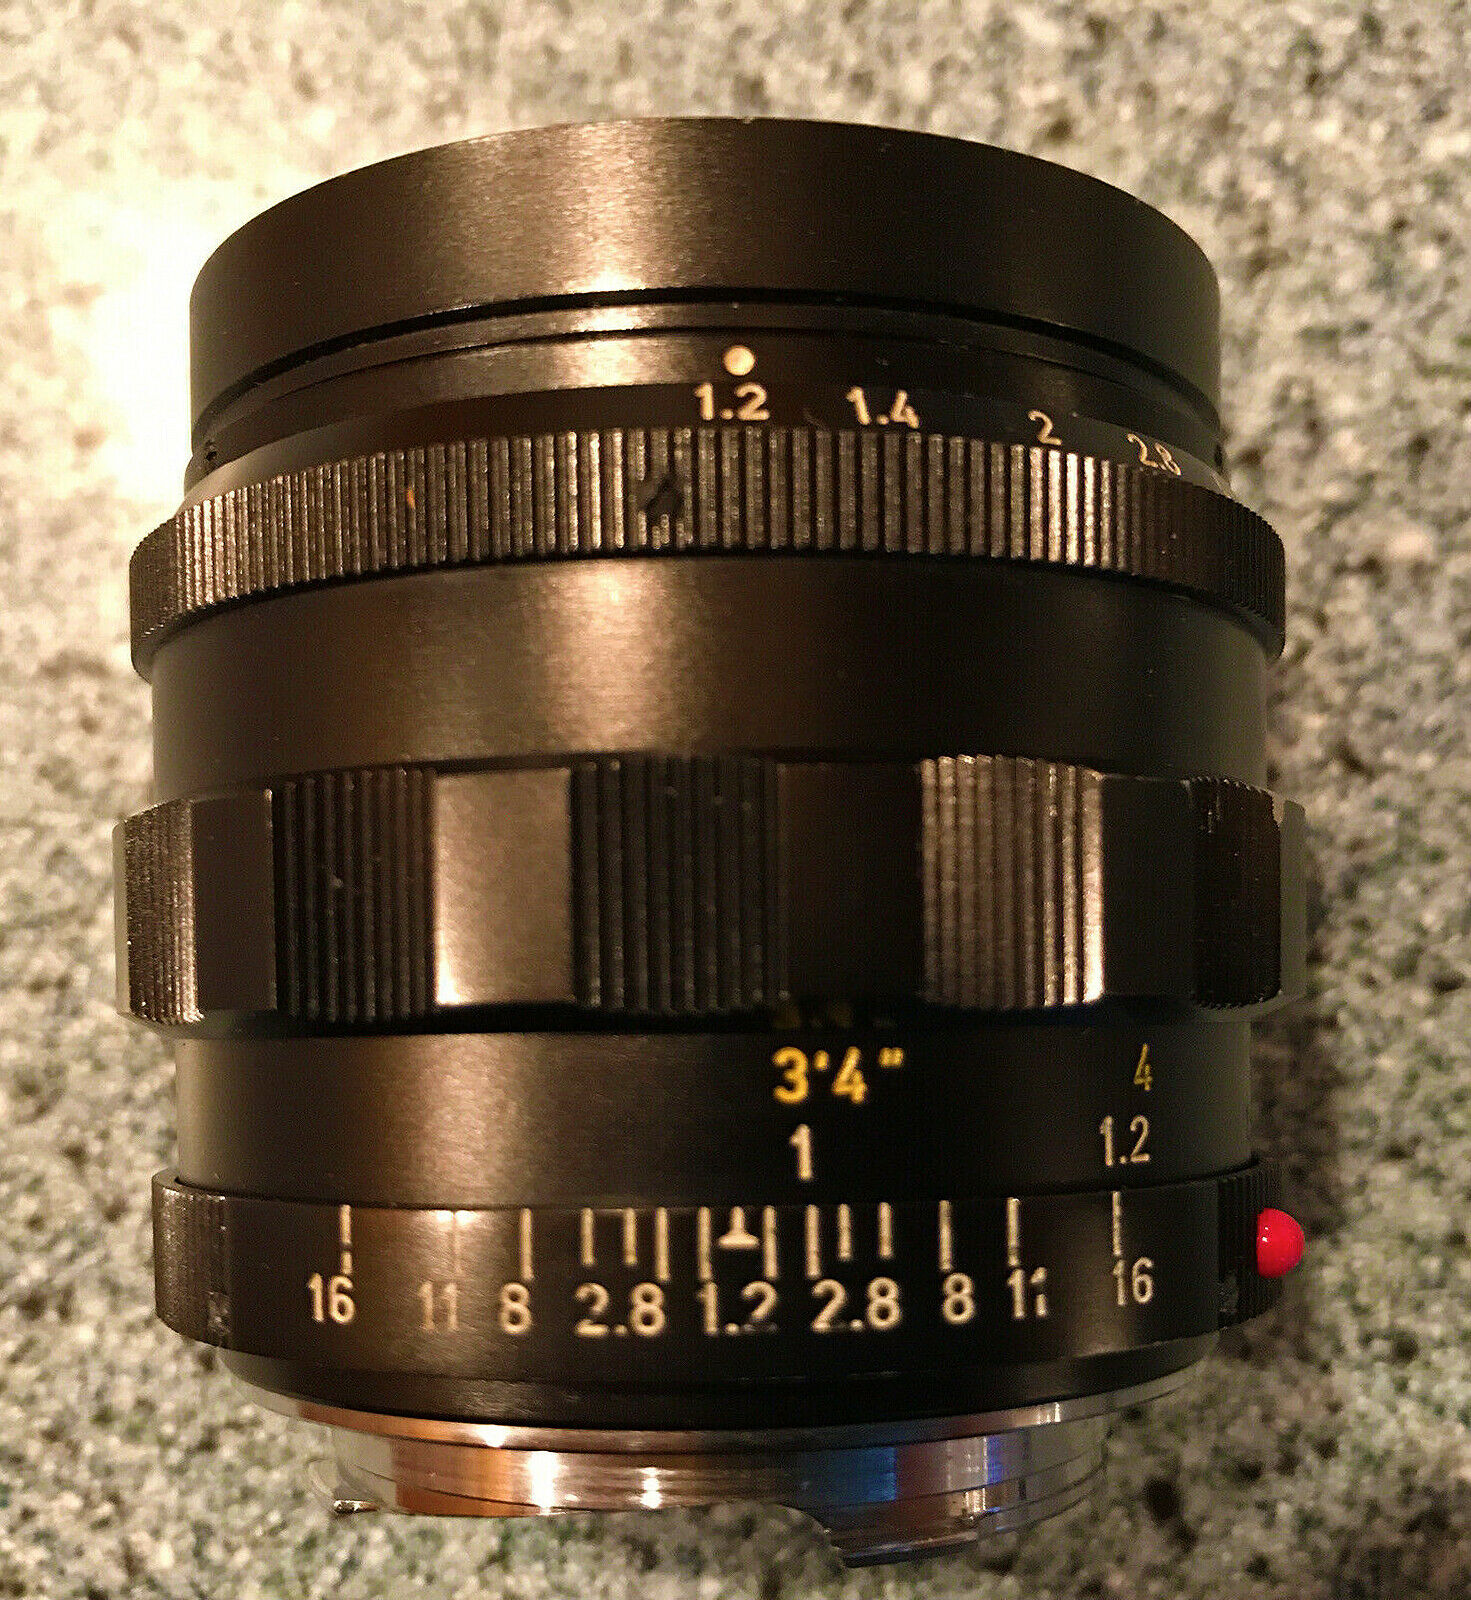 Additional information on the rumored Leica Noctilux M 50mm f/1.2 